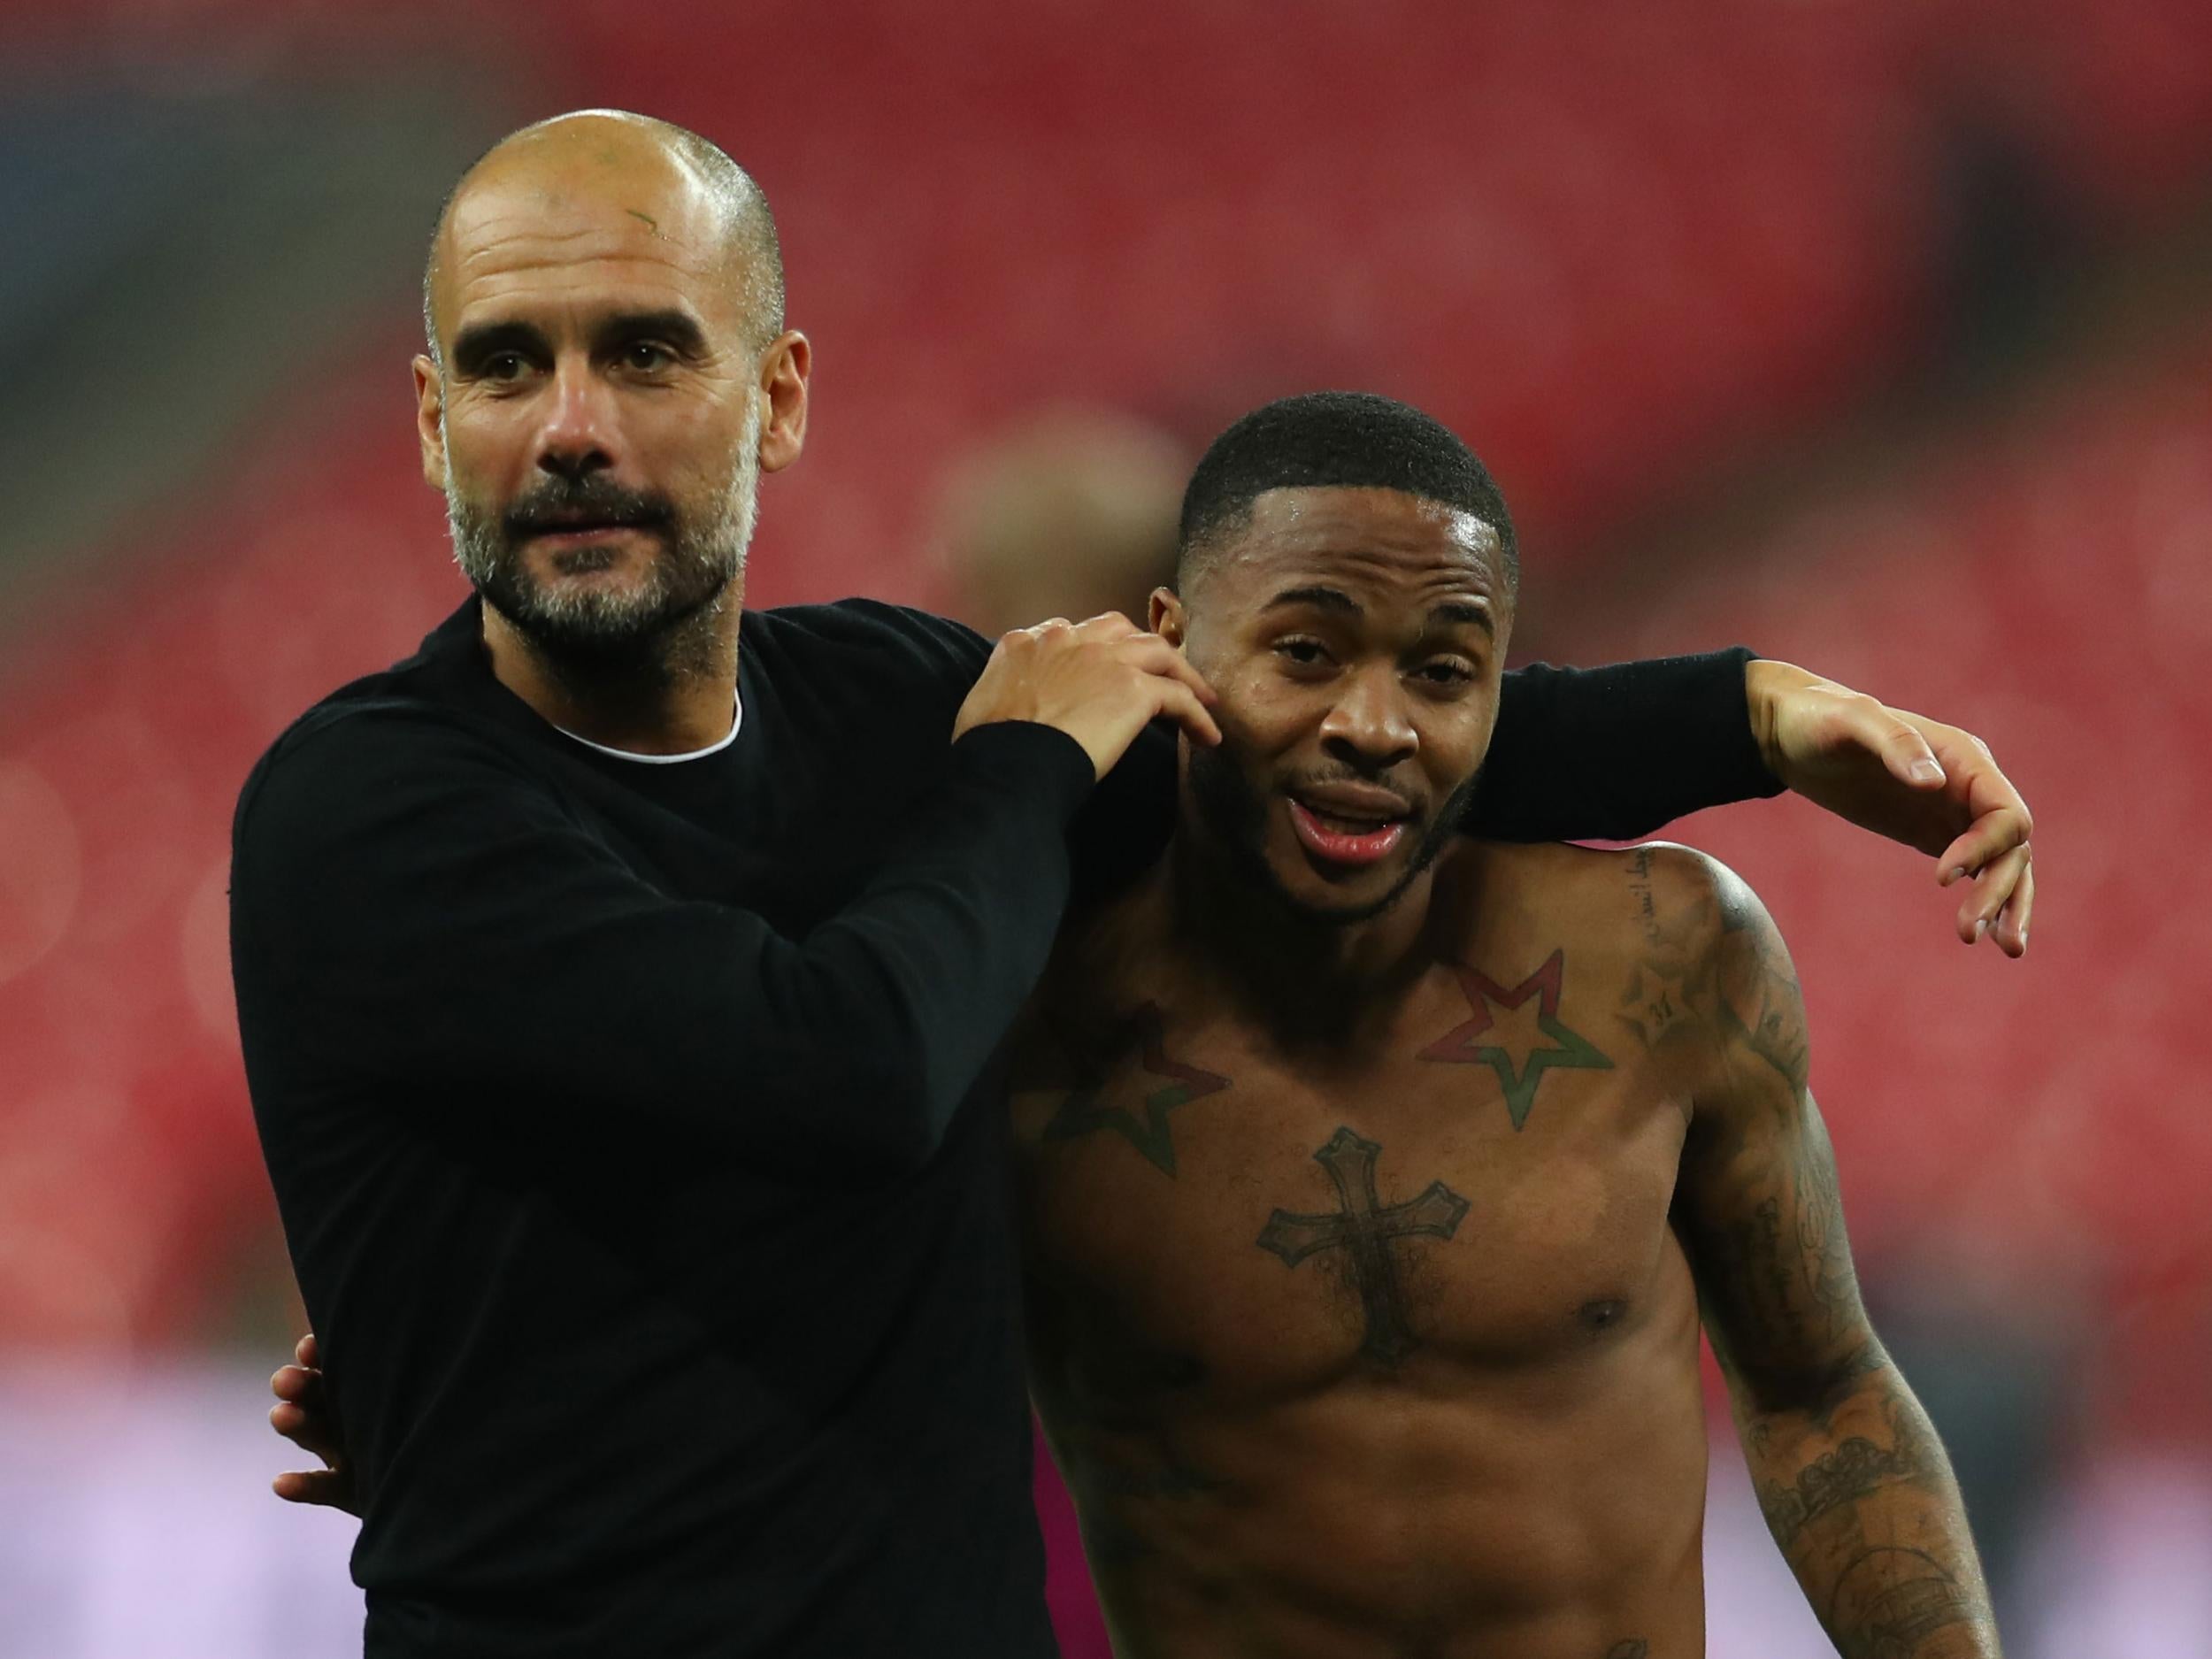 Raheem Sterling credits his improvement this year to Pep Guardiola's methods